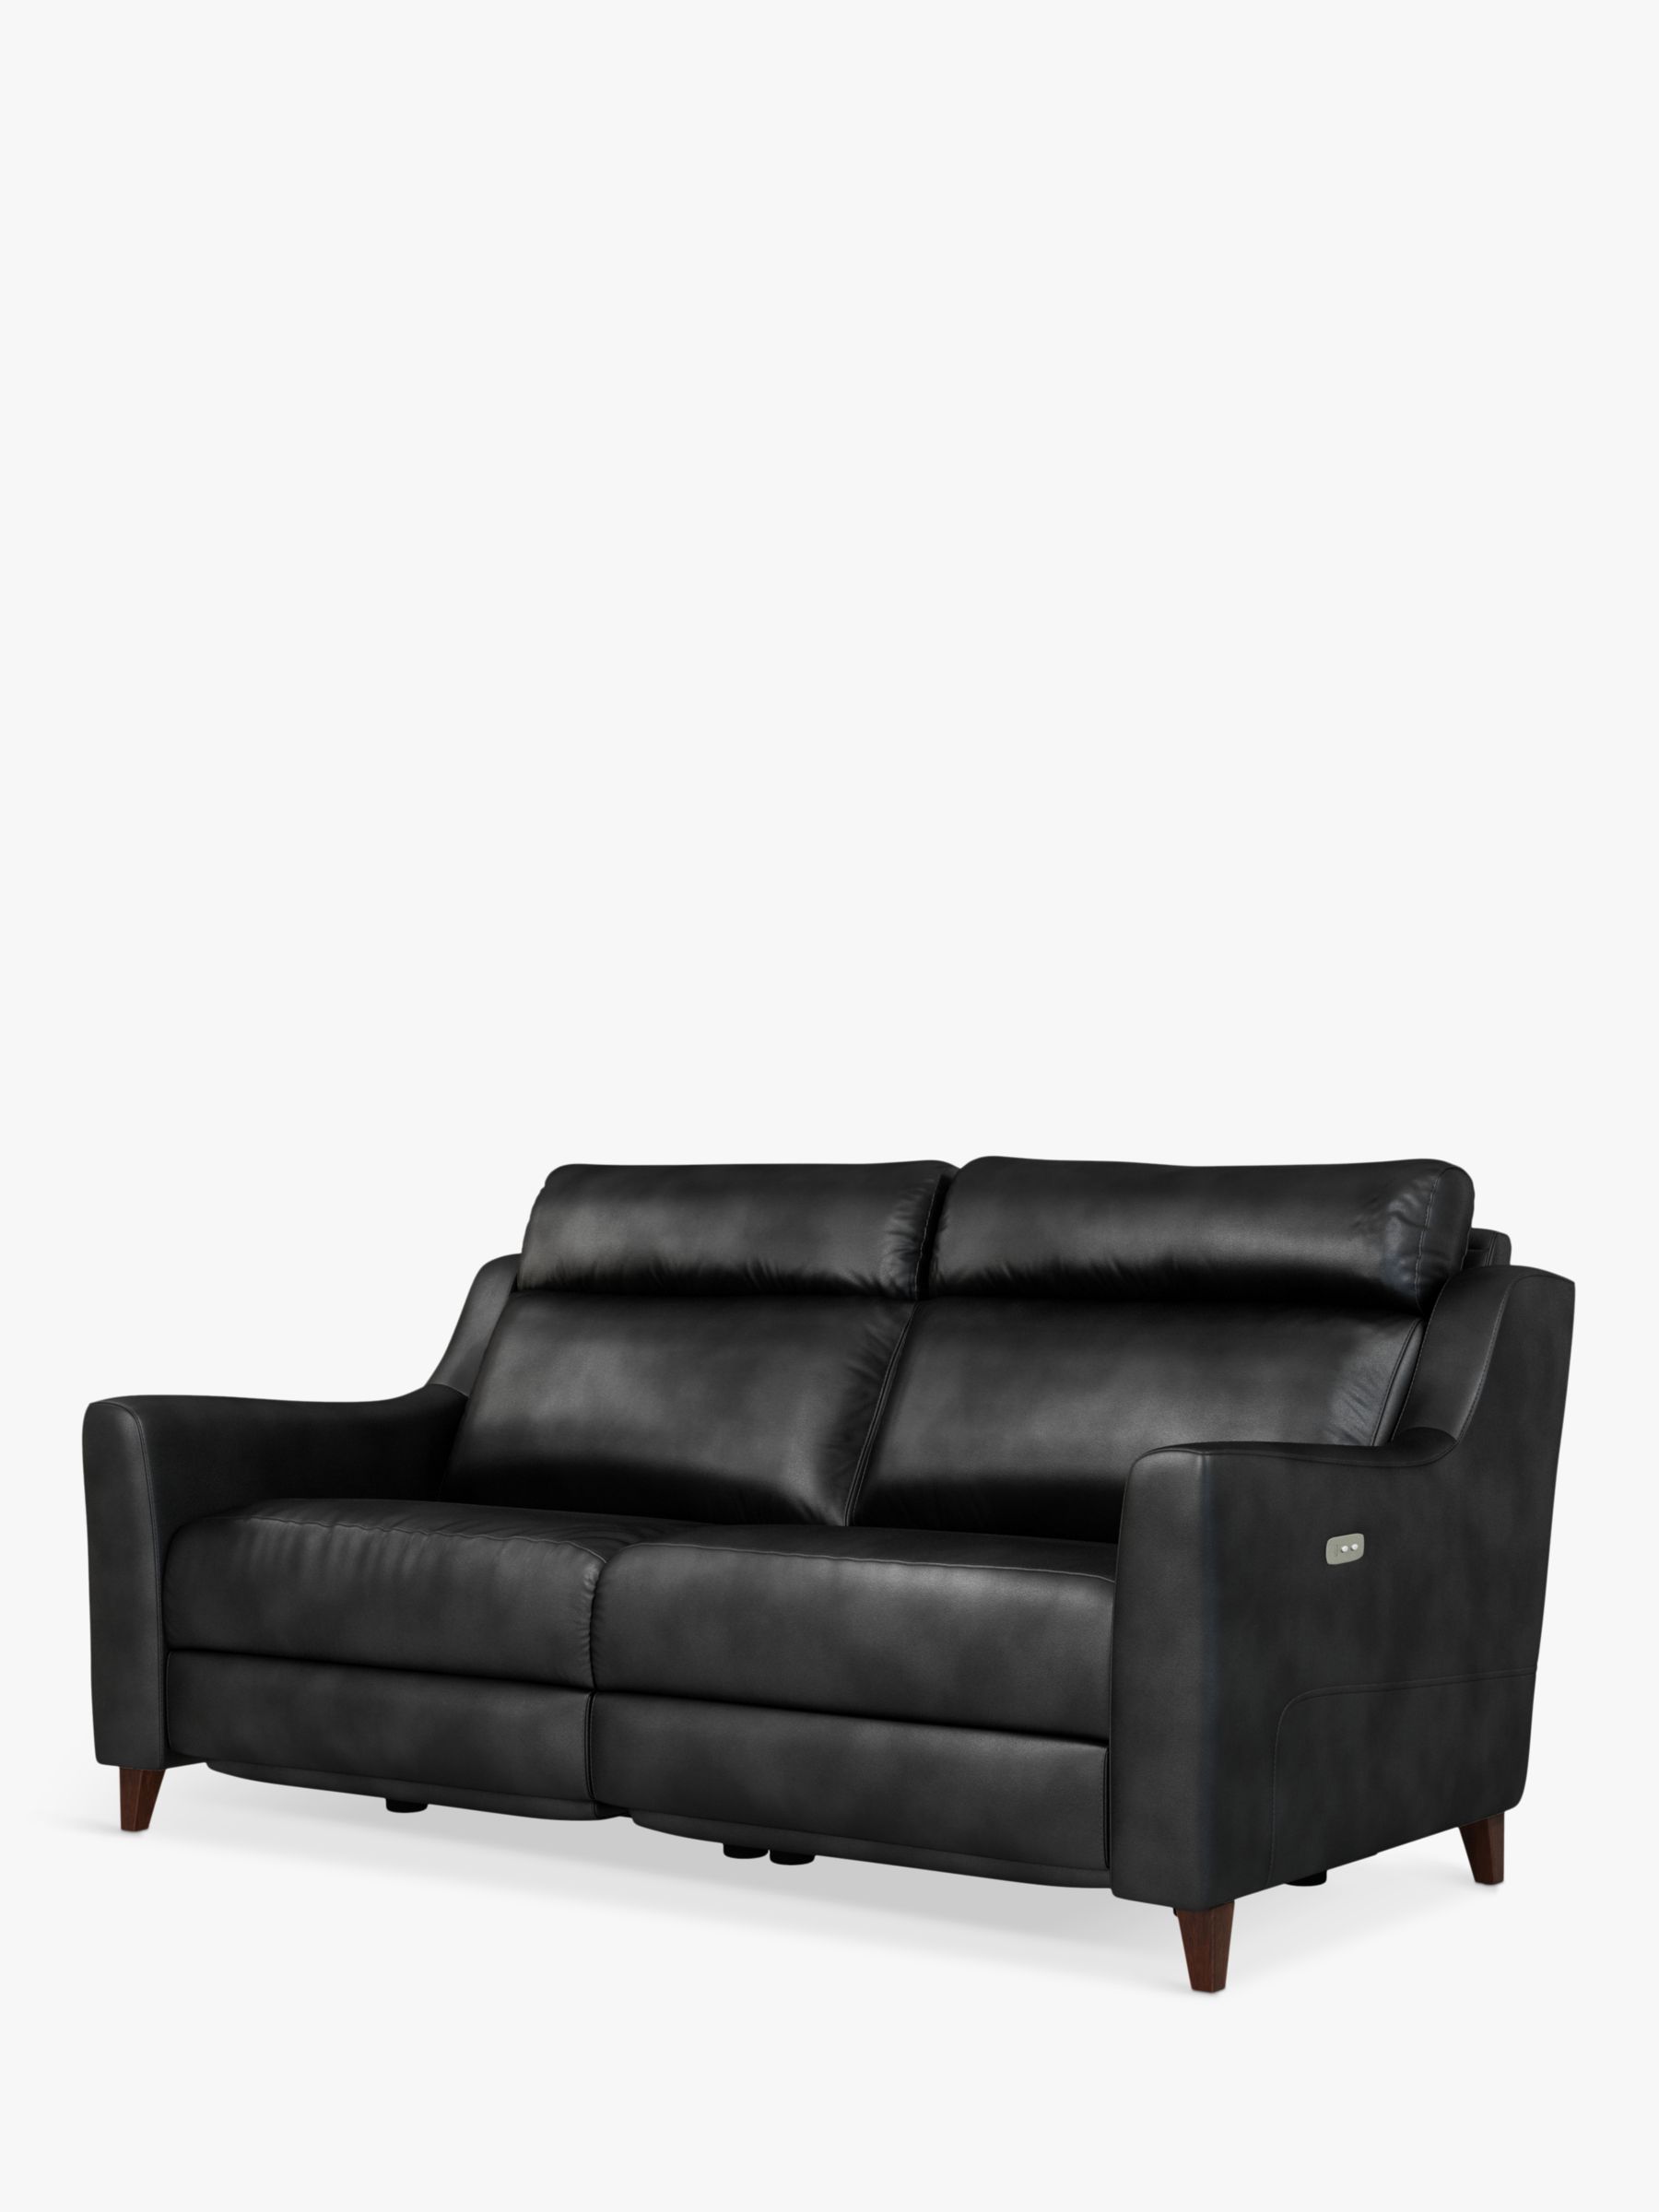 2 Seater Power Recliner Leather Sofa, Reclining Leather Sectional